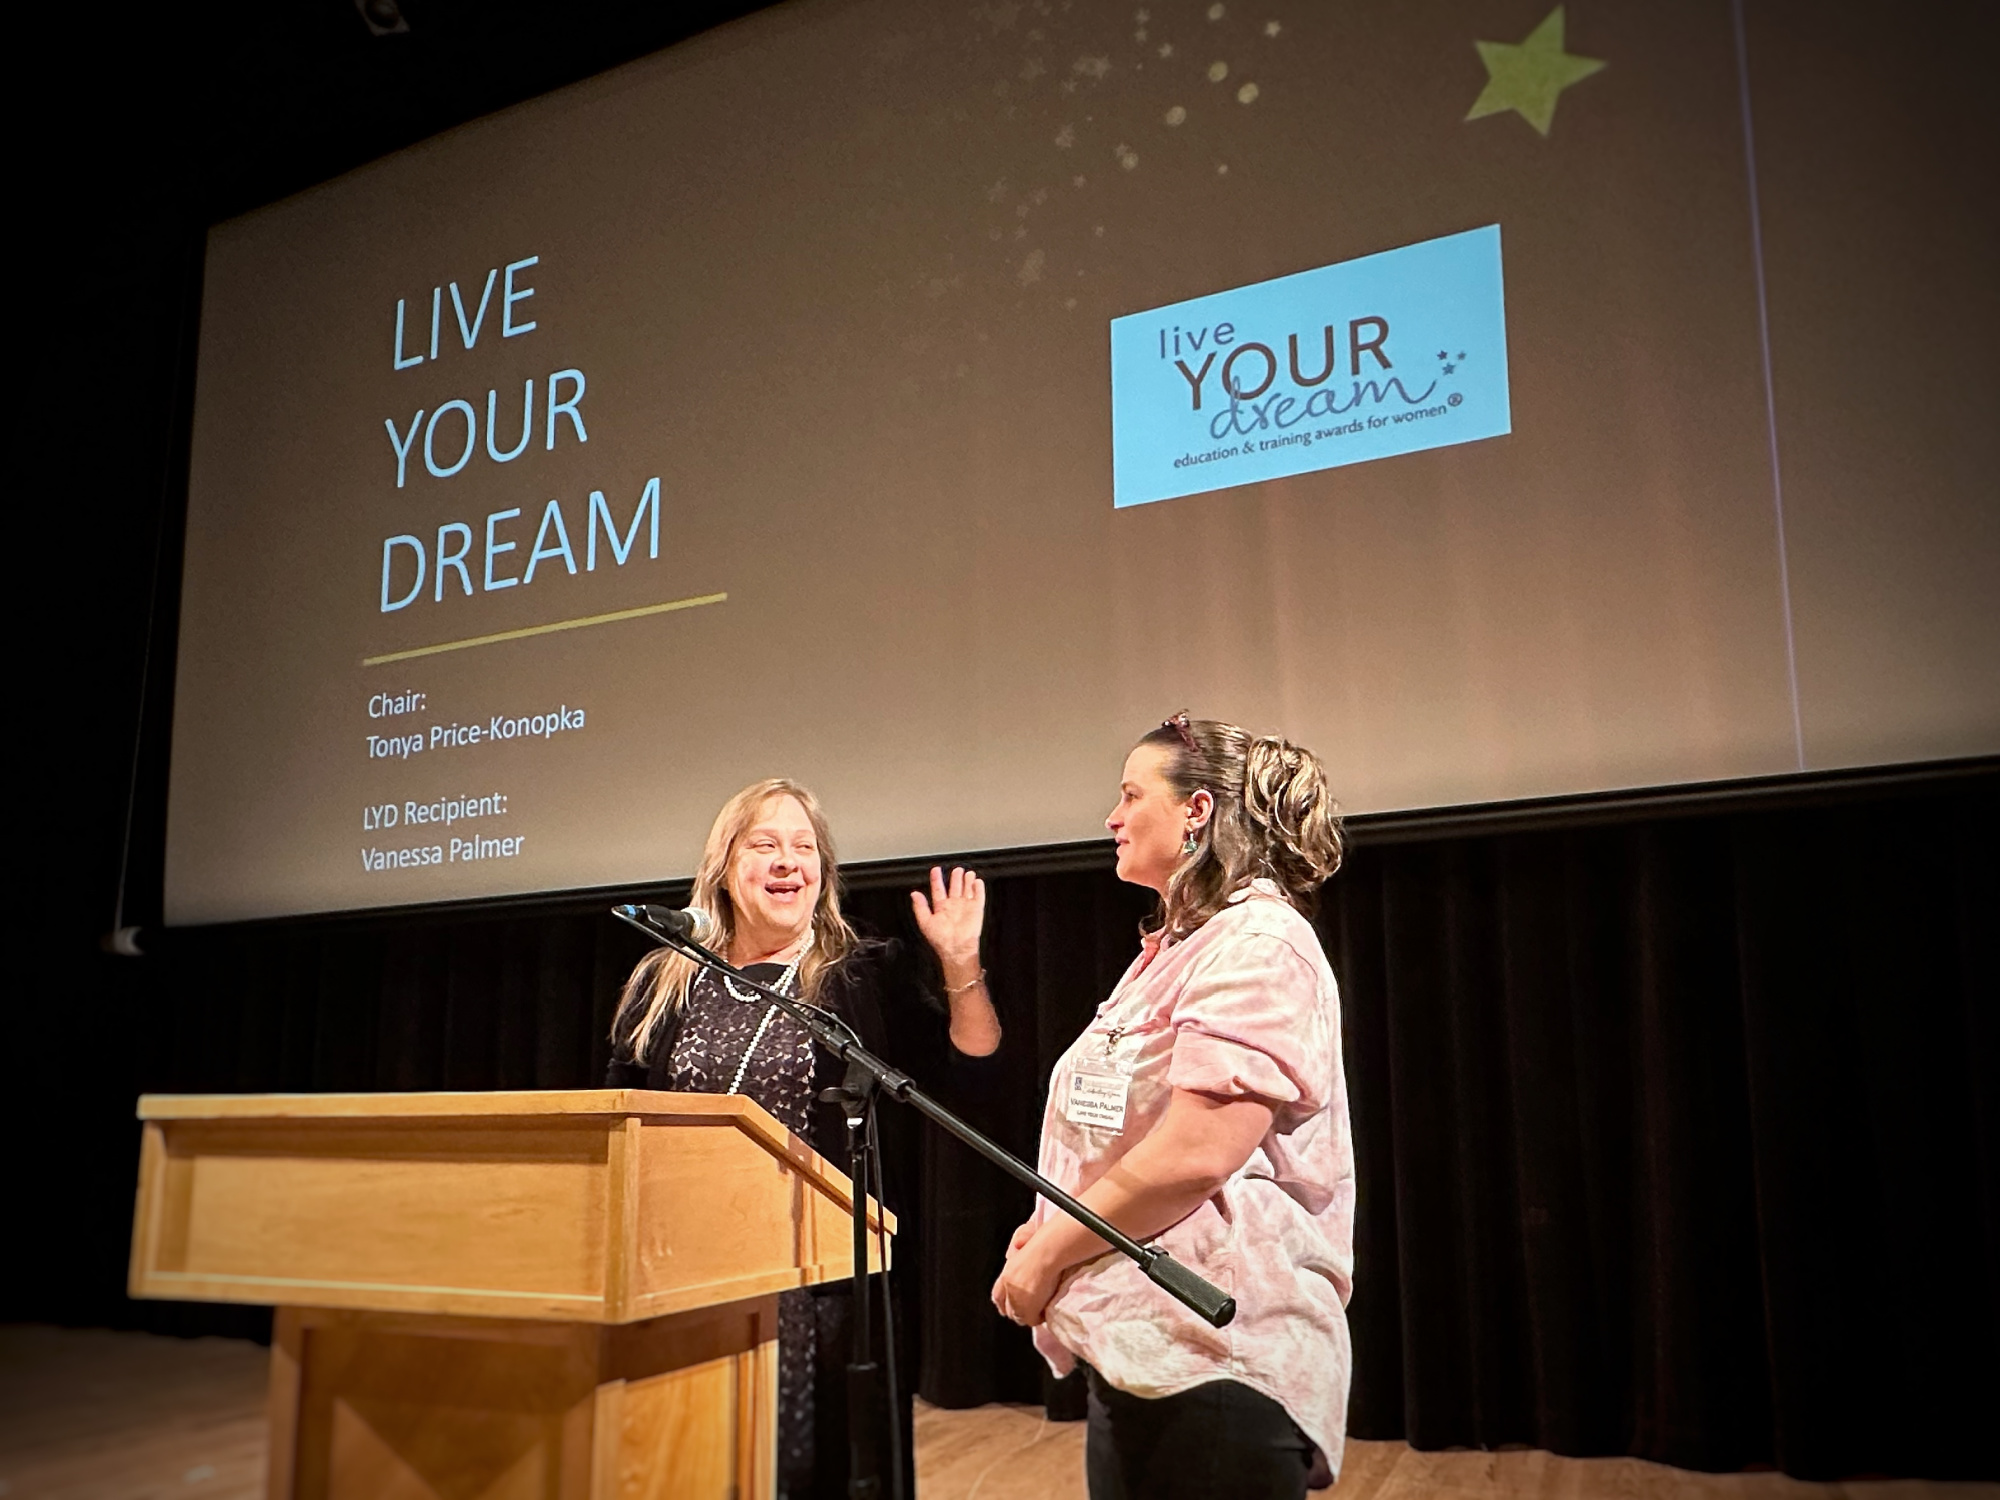 Tonya Price-Konopka introduces Vanessa Palmer, one of our Live Your Dream recipients this past year